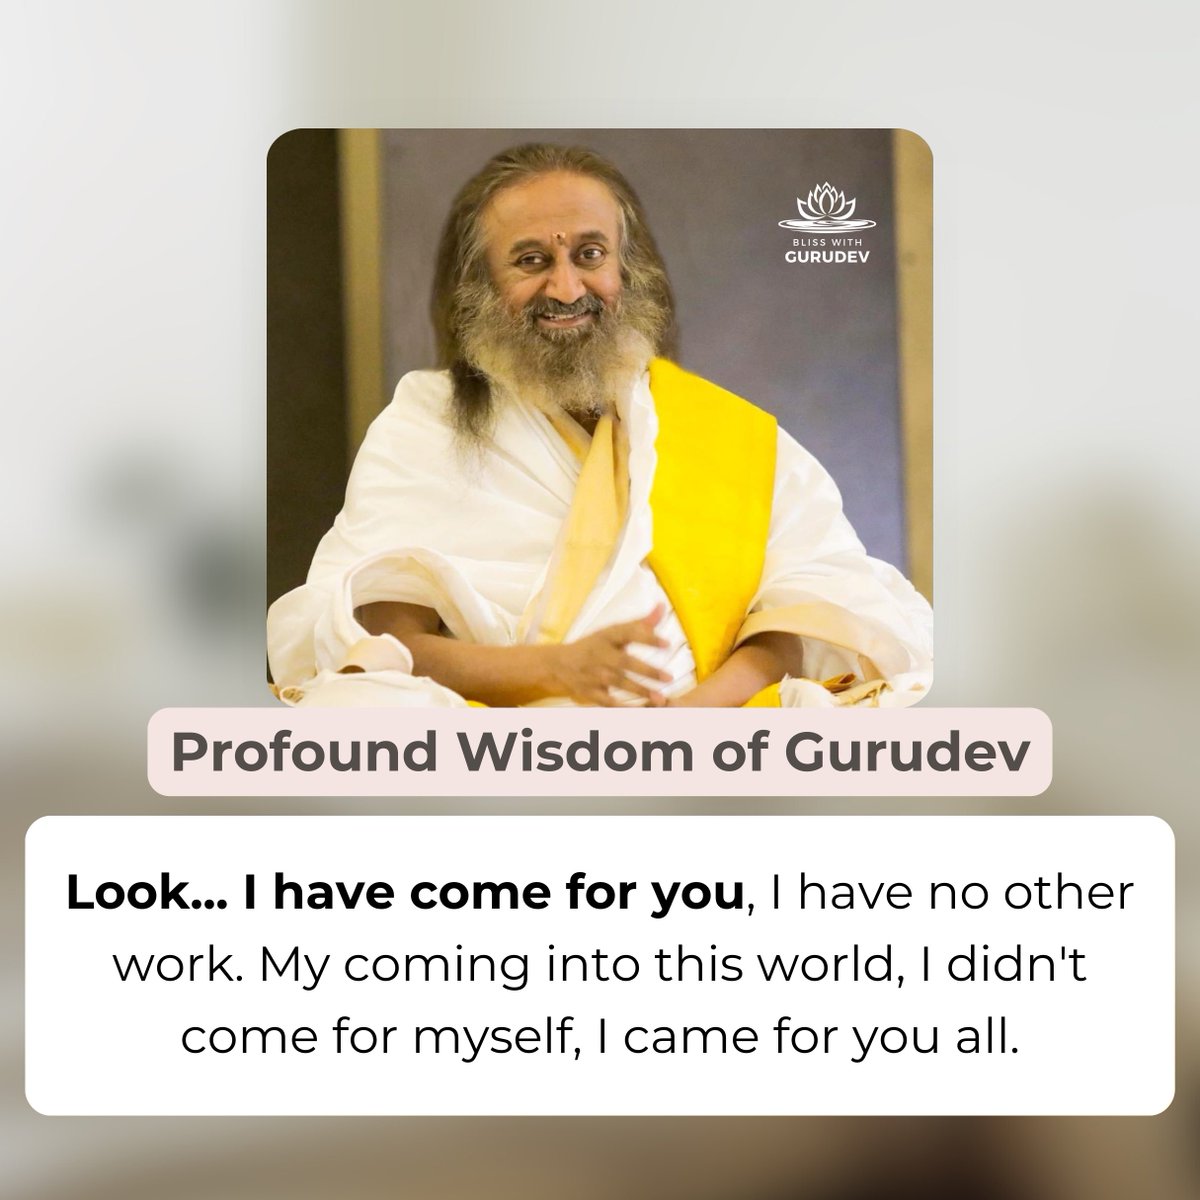 Look... I have come for you, I have no other work. My coming into this world, I didn't come for myself, I came for you all. - #Gurudev @SriSri 

#HappyBirthdayGurudev